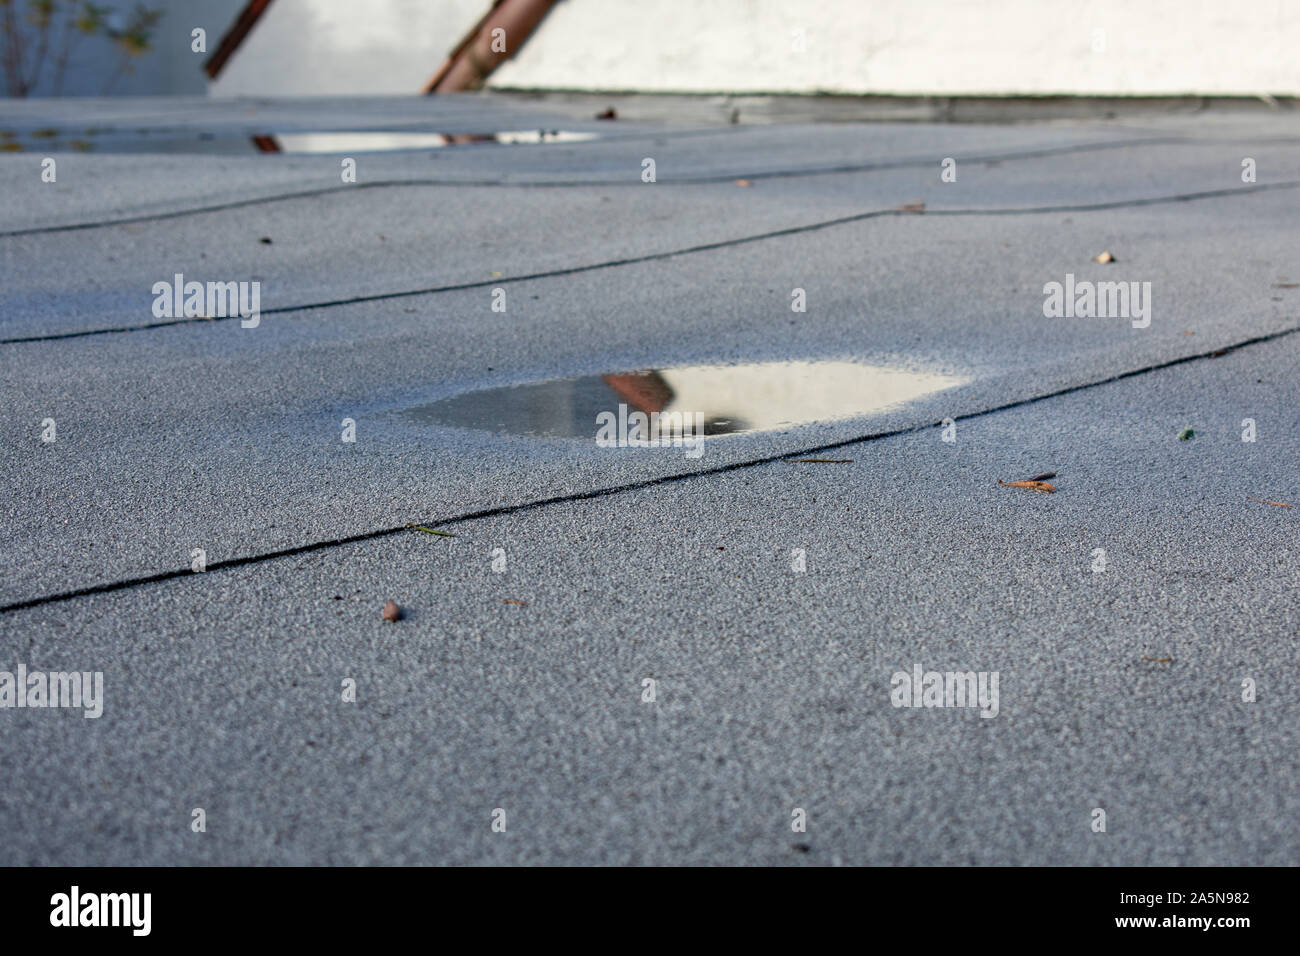 Ponding rainwater on flat roof after rain is result of drainage problem. Roof leaking, settling or sagging. Stock Photo